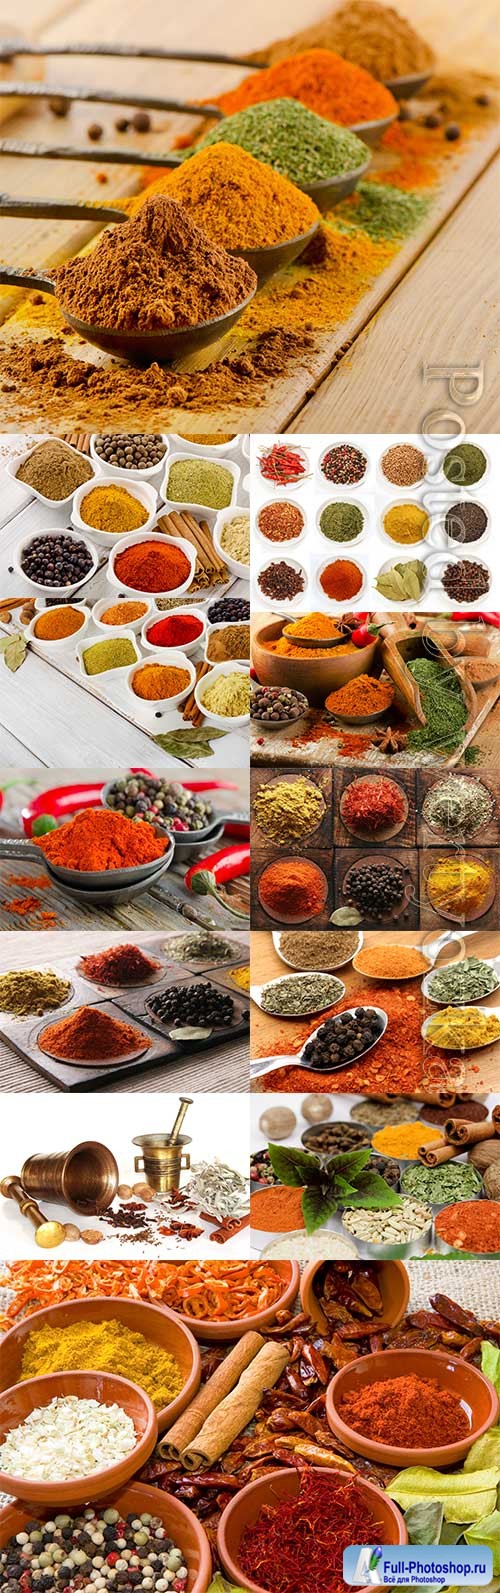 Spices in various containers stock photo